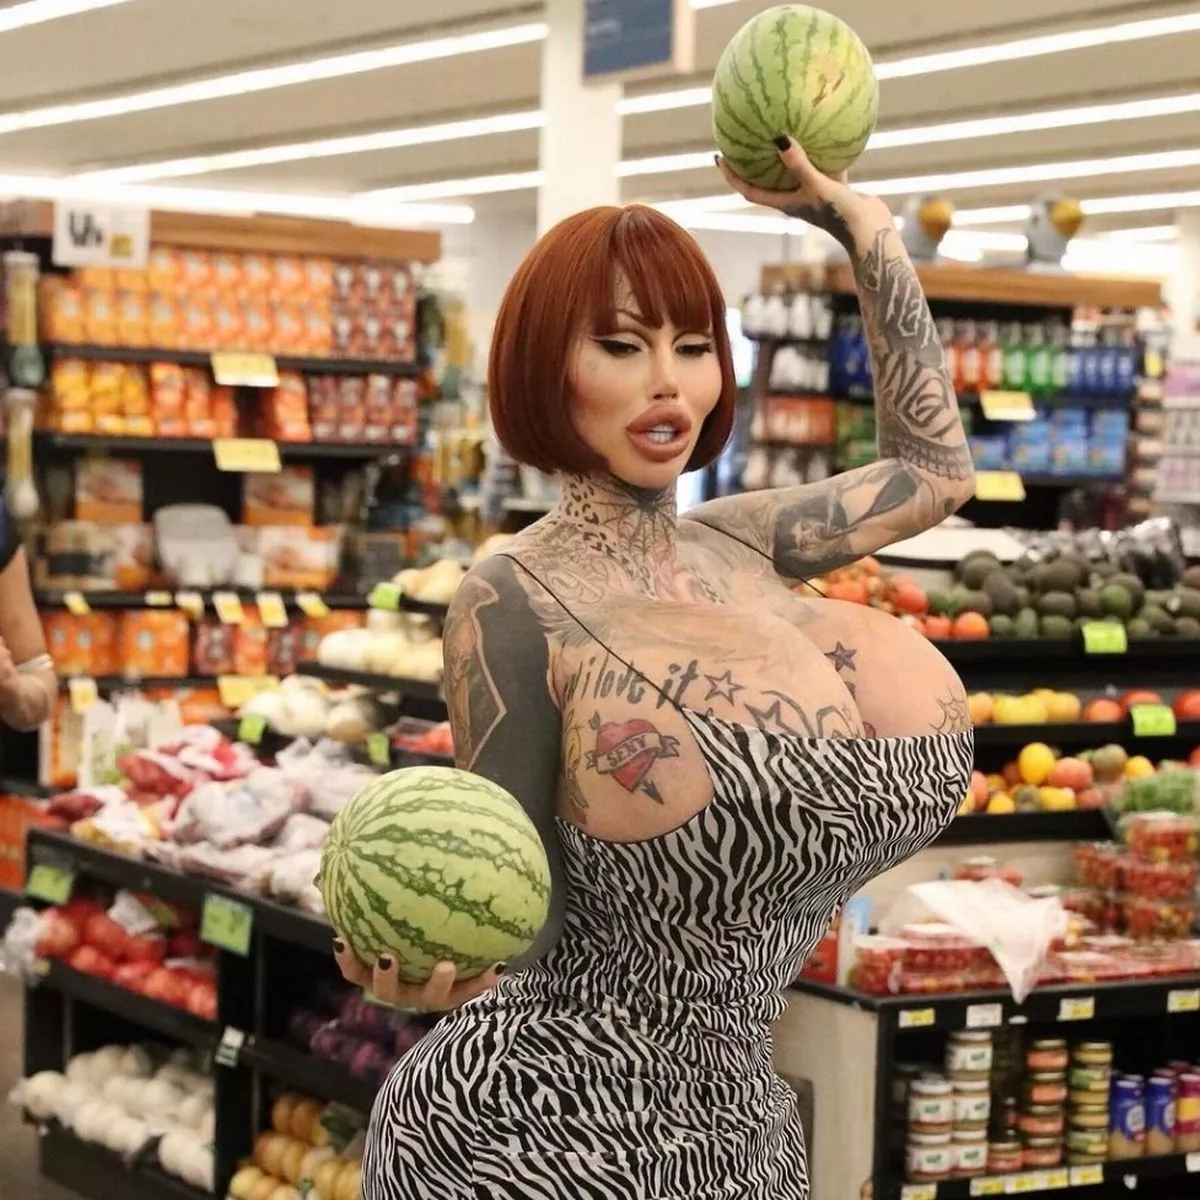 christal mitchell recommends Big Tits Grocery Store